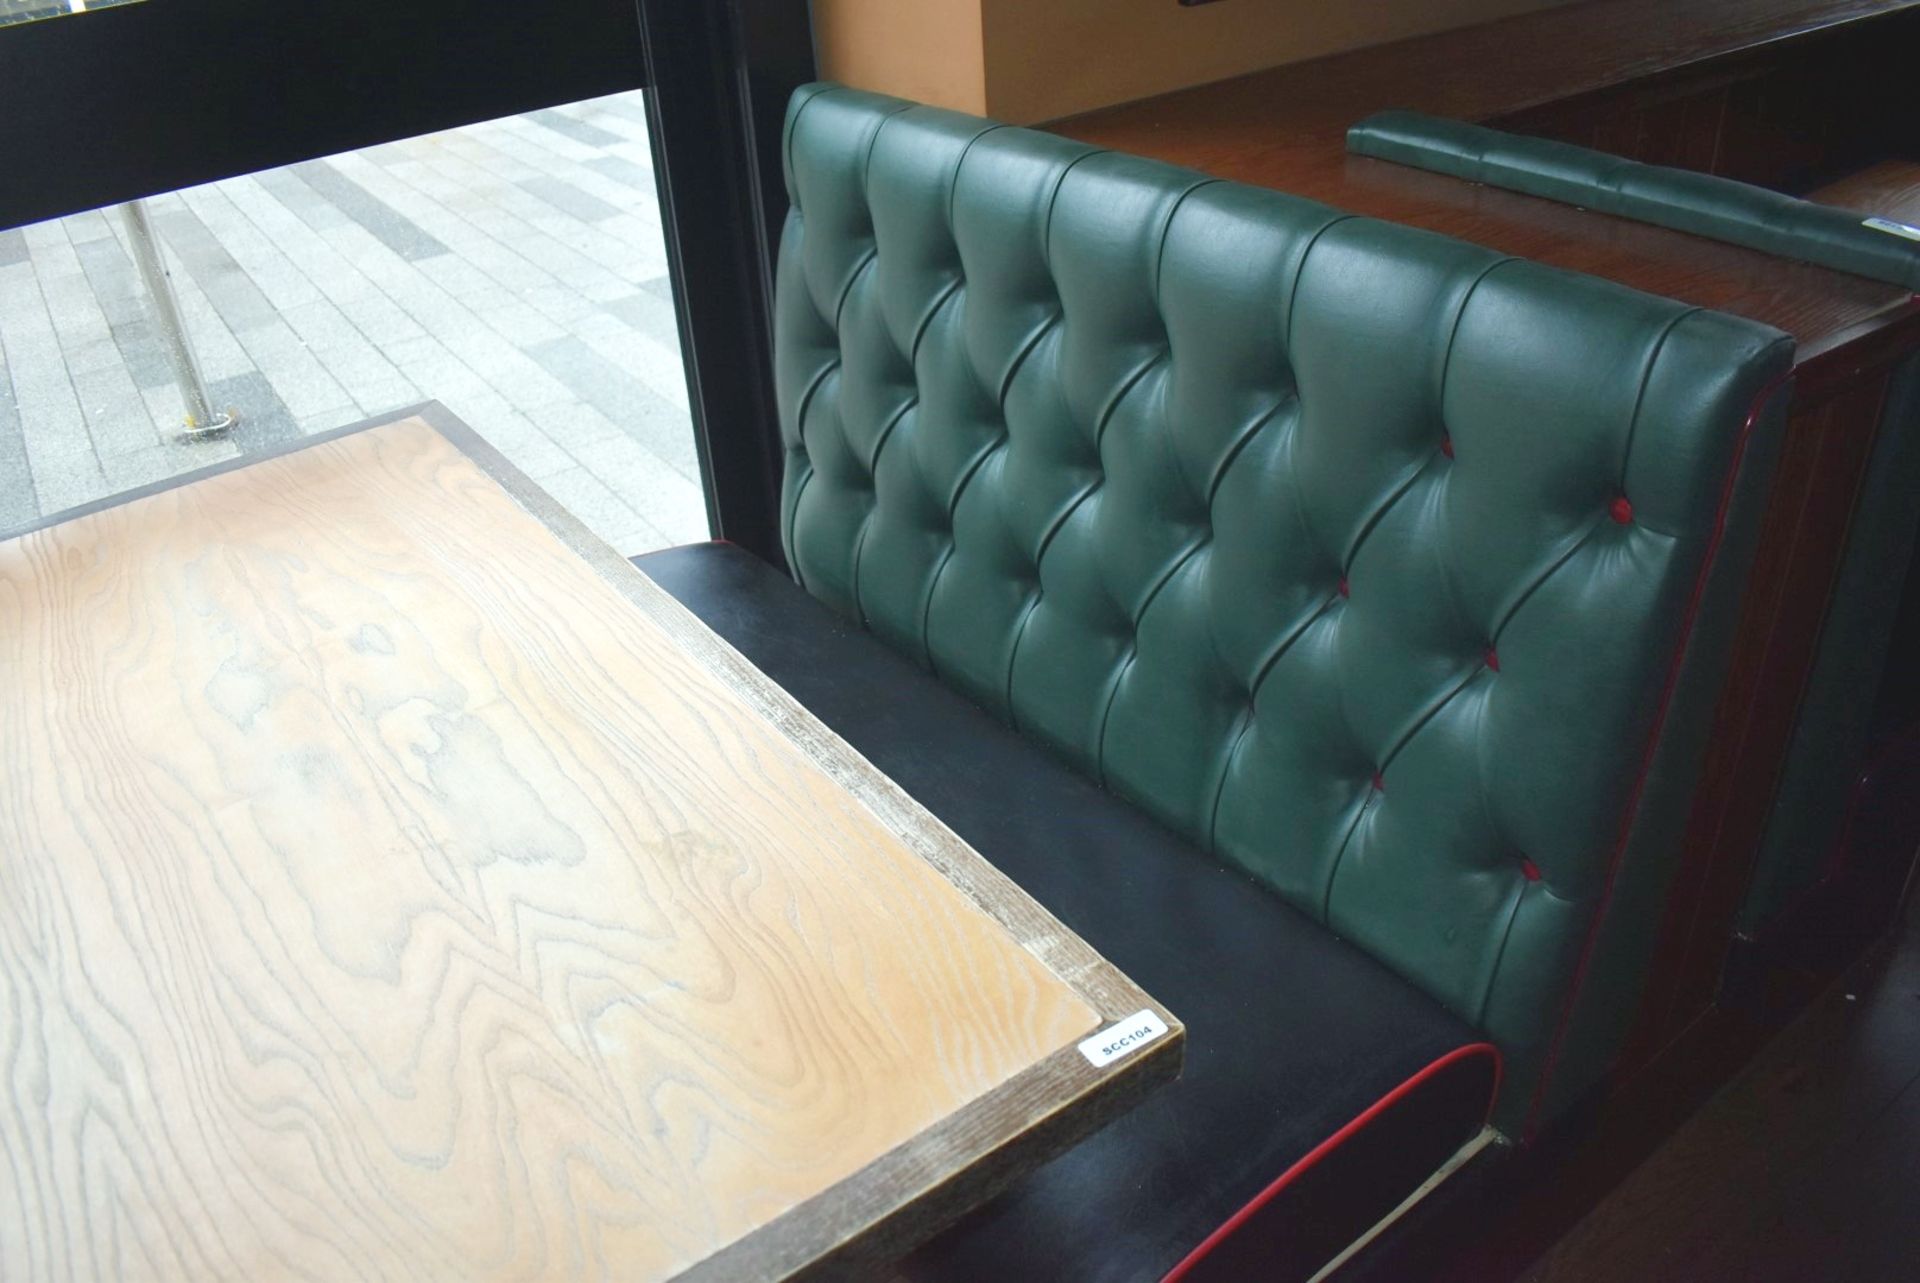 4 x Sections of Restaurant Double Booth Seating - Sits Up to 12 Persons - Green & Black Upholstery - Image 10 of 24